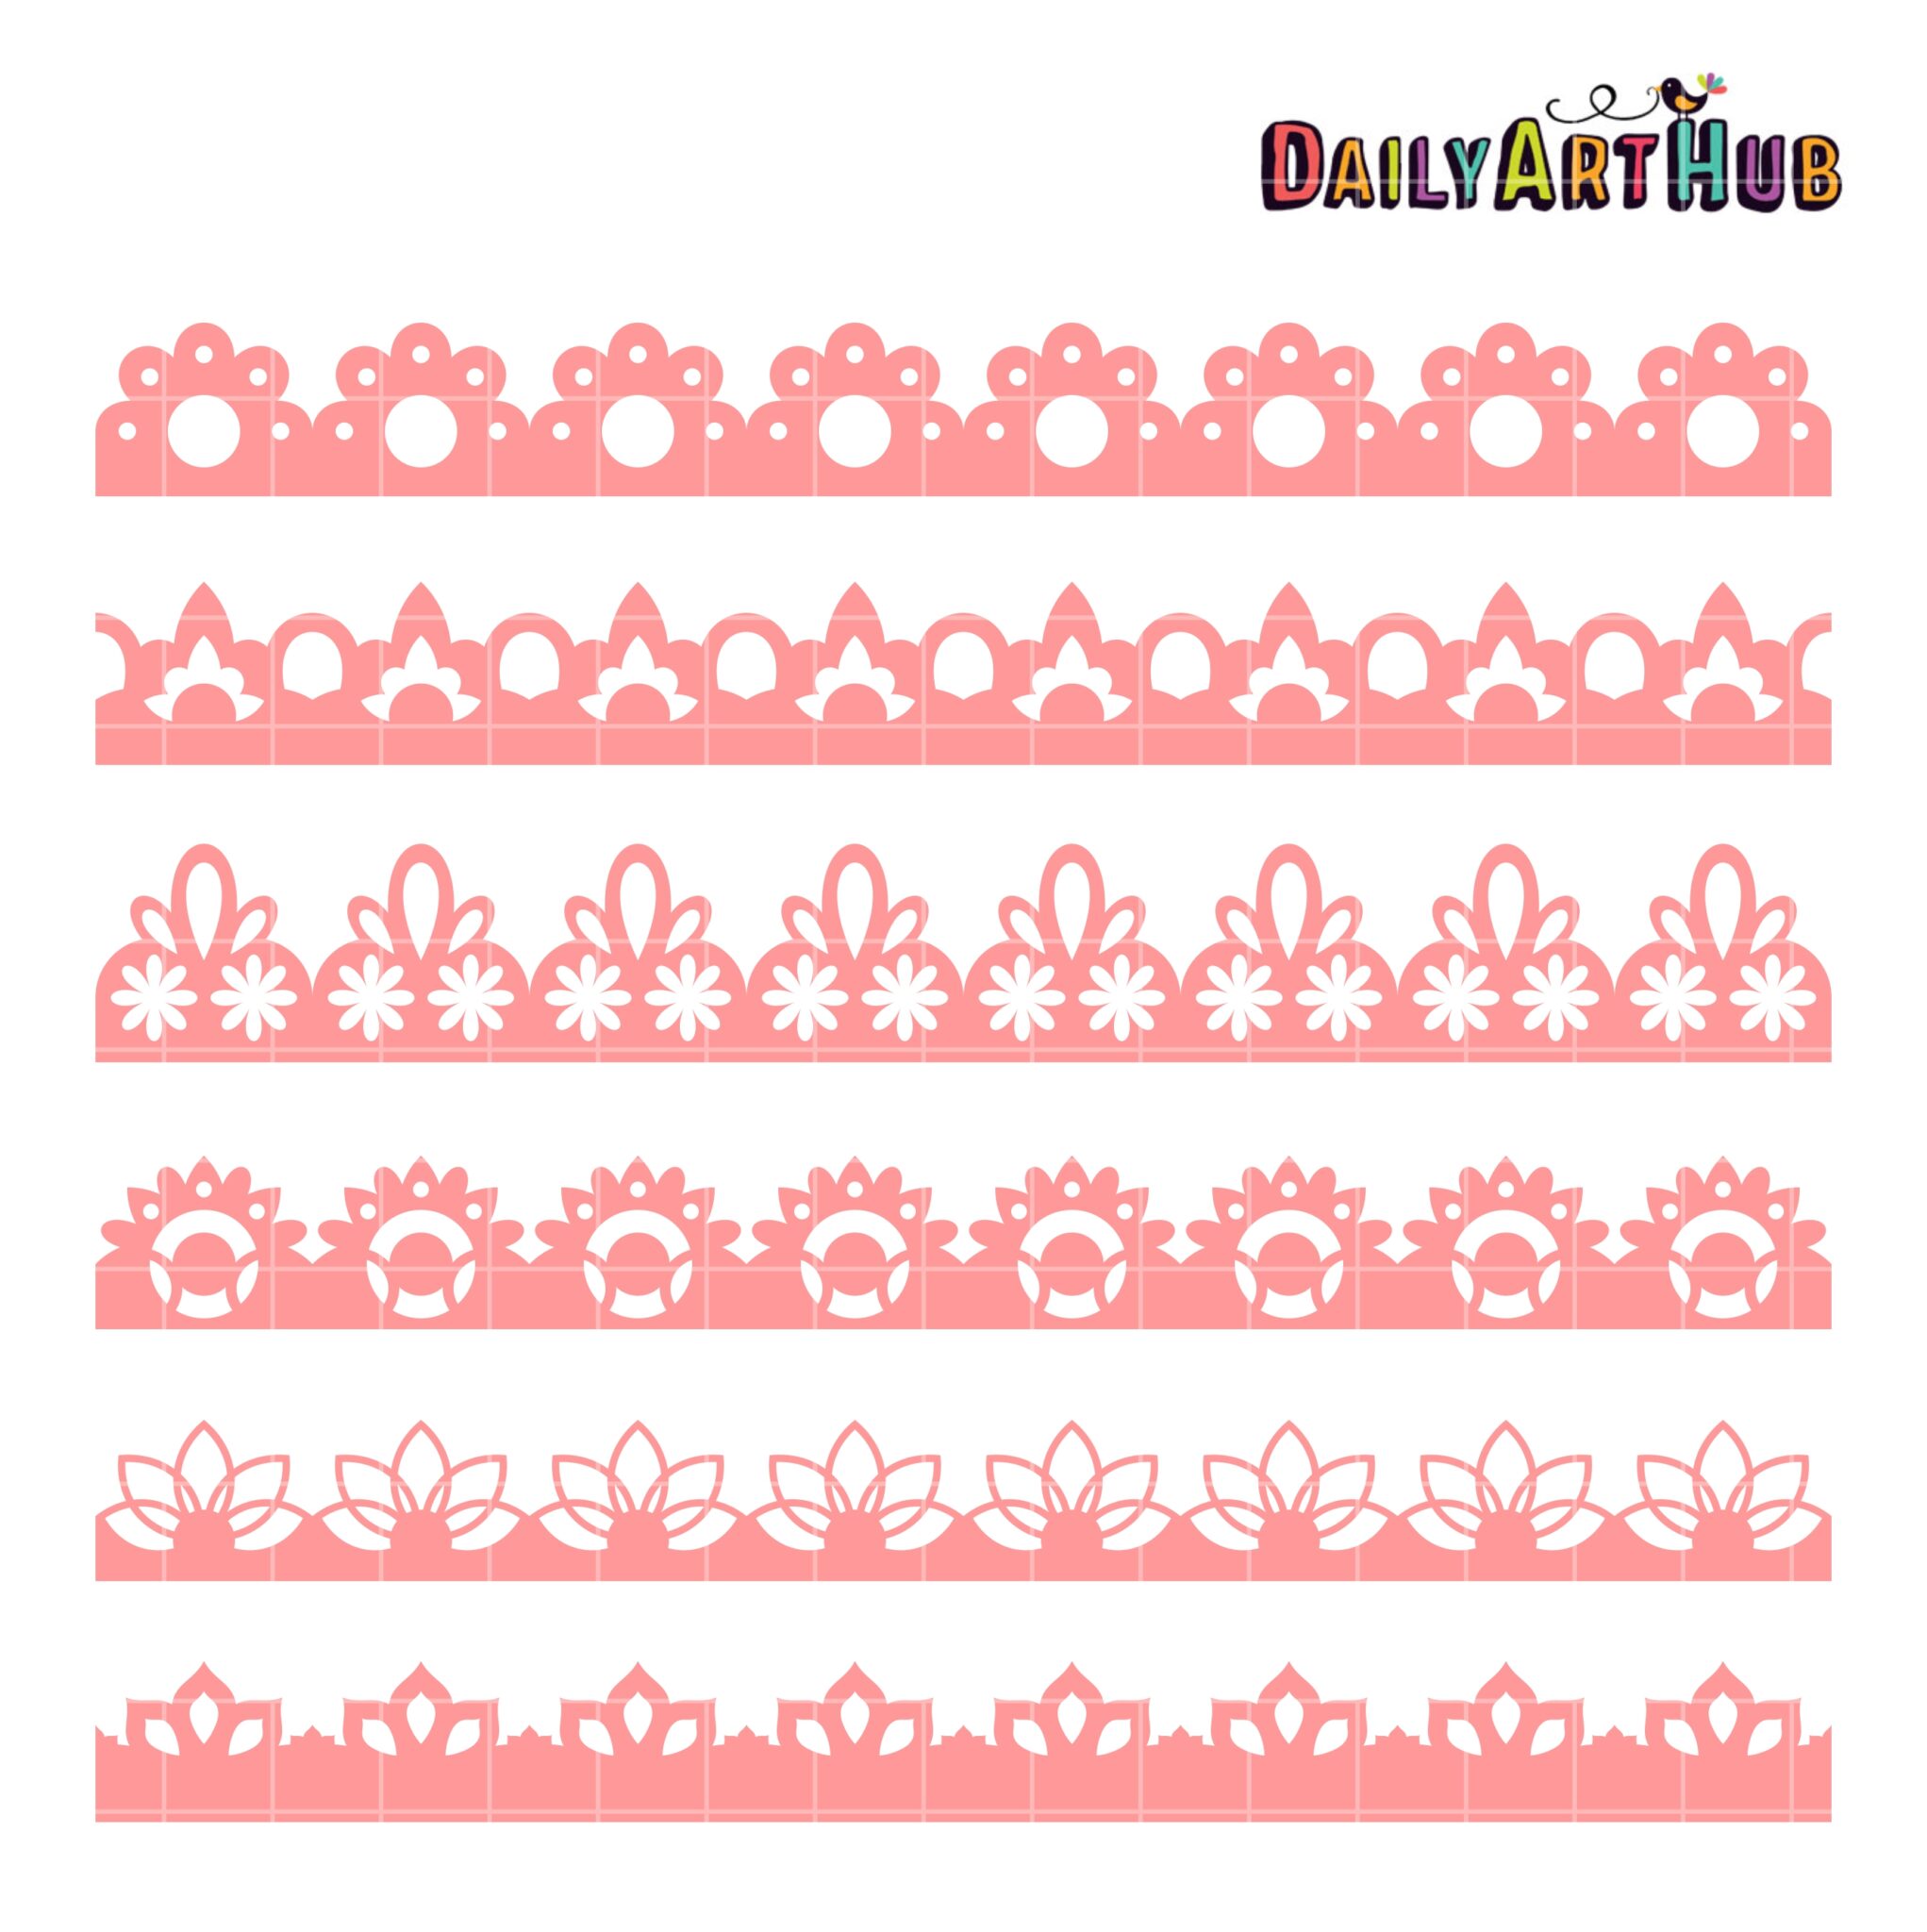 Lace Borders Clipart  Clip art borders, Lace drawing, Lace painting